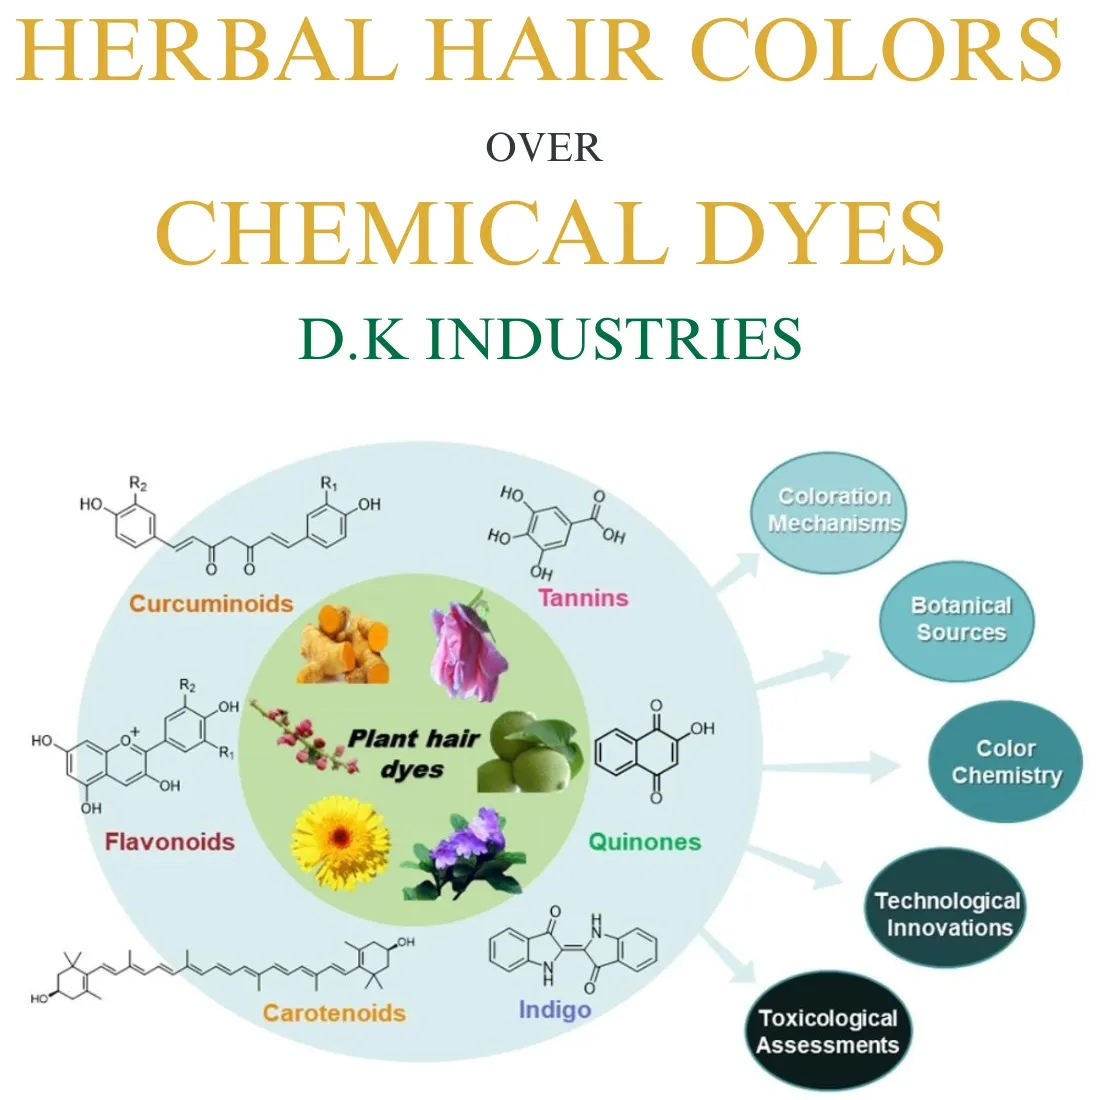 HERBAL HAIR COLORS OVER CHEMICAL DYES D.K INDUSTRIES - www.dkihenna.com